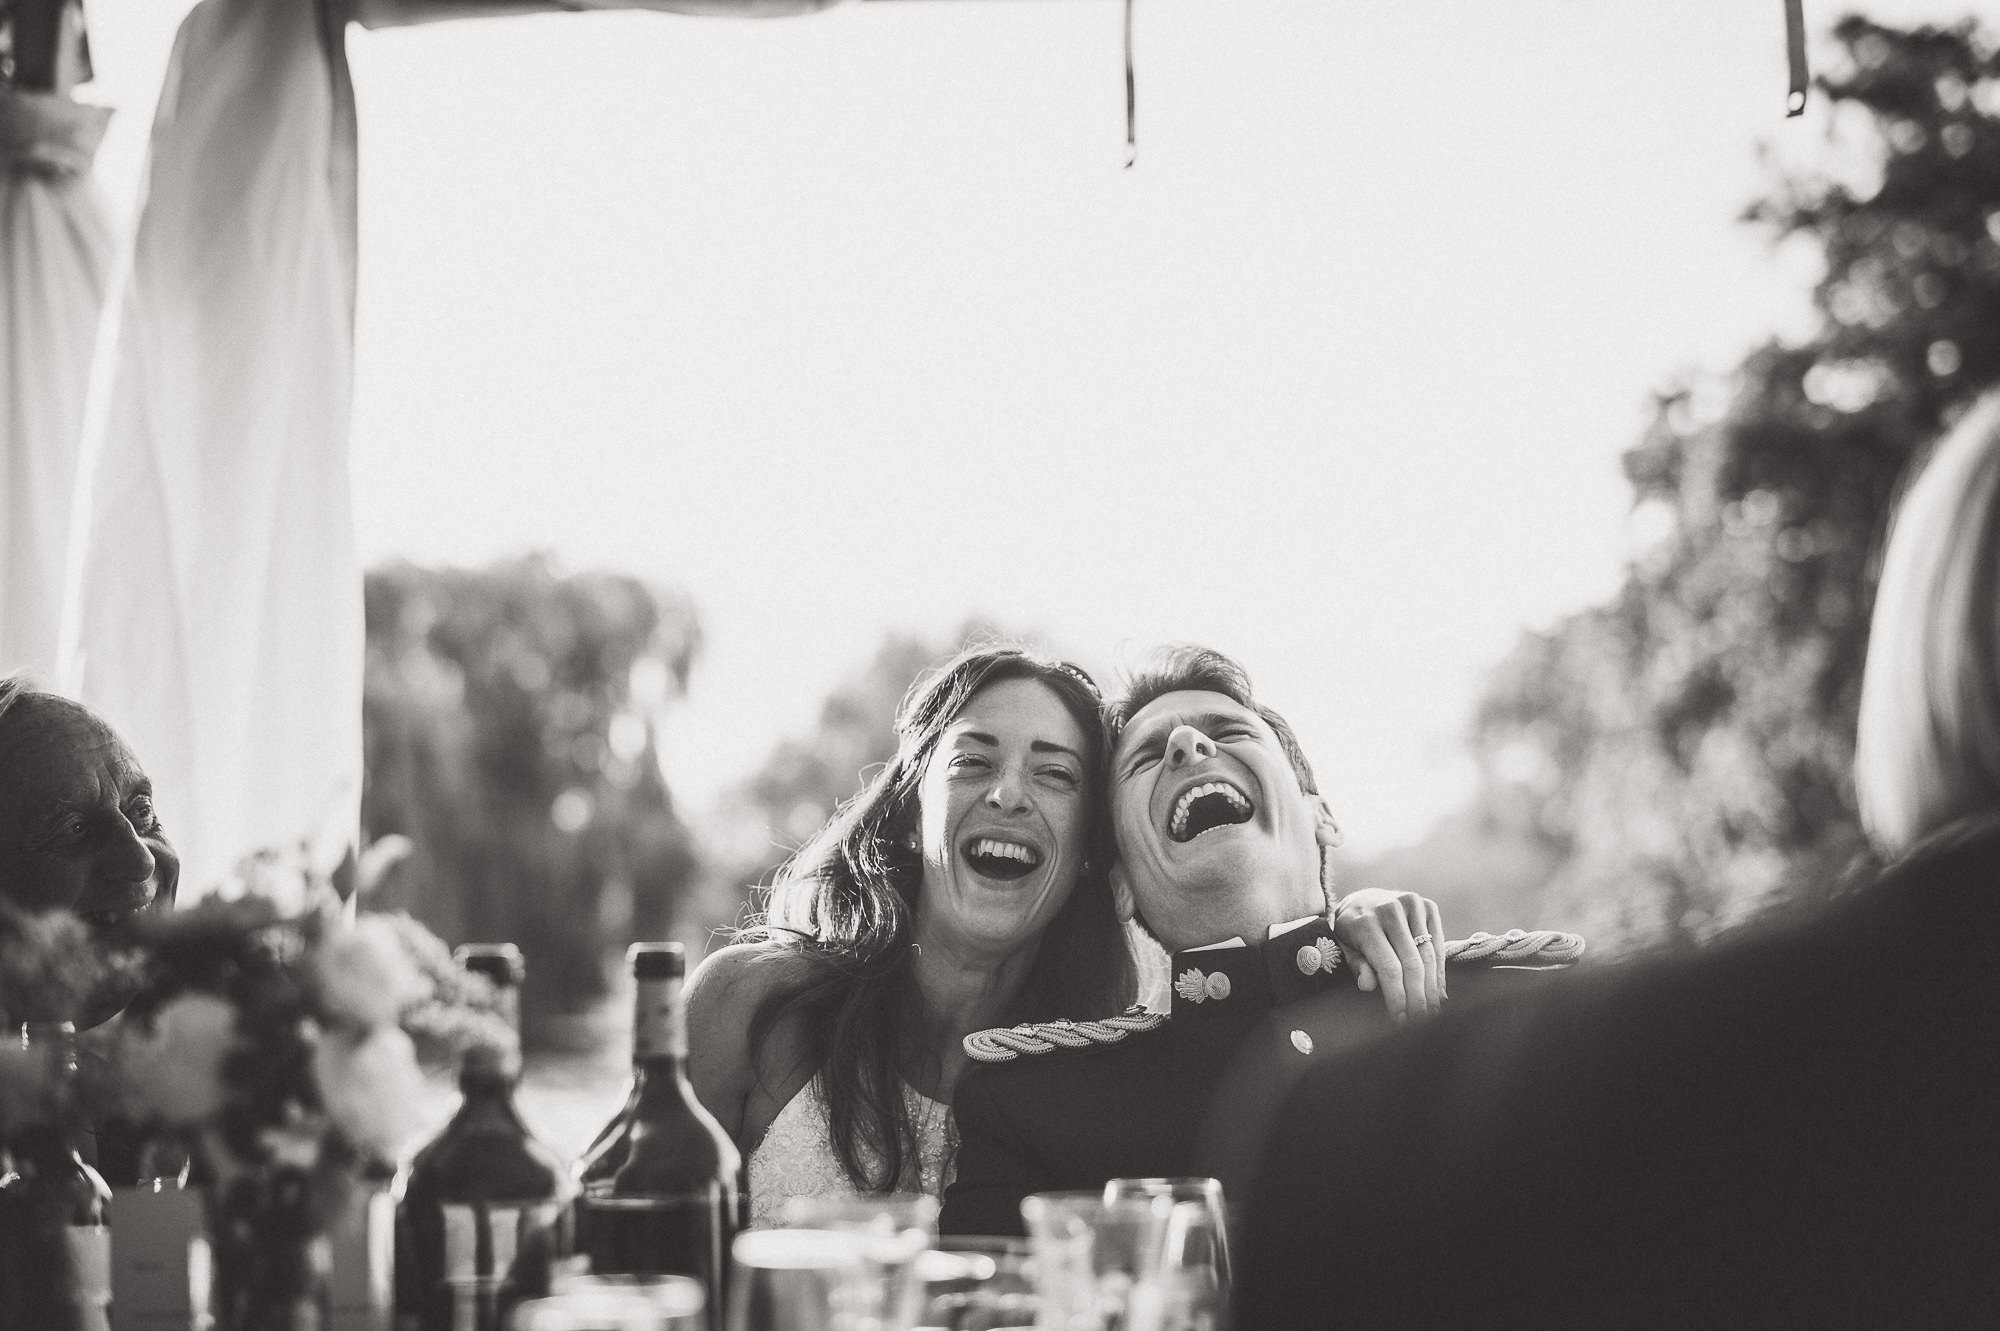 A wedding photographer captures a joyful wedding photo of the bride and groom laughing at their reception.